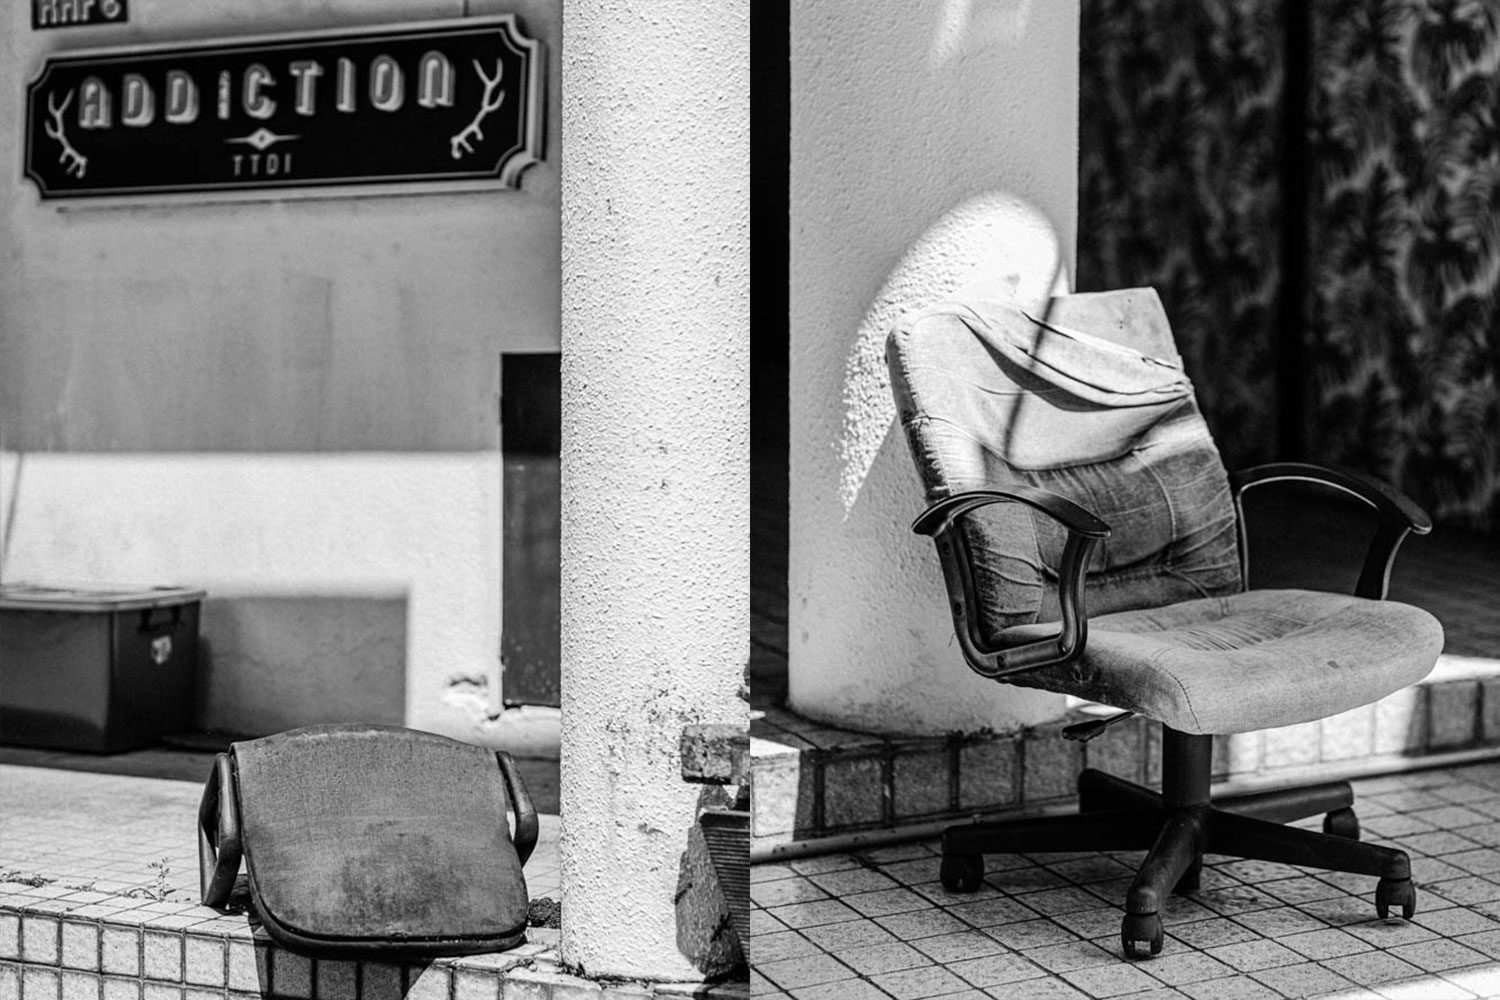 Street photography in Kuala Lumpur of an abandoned chair outside the Addiction restaurant